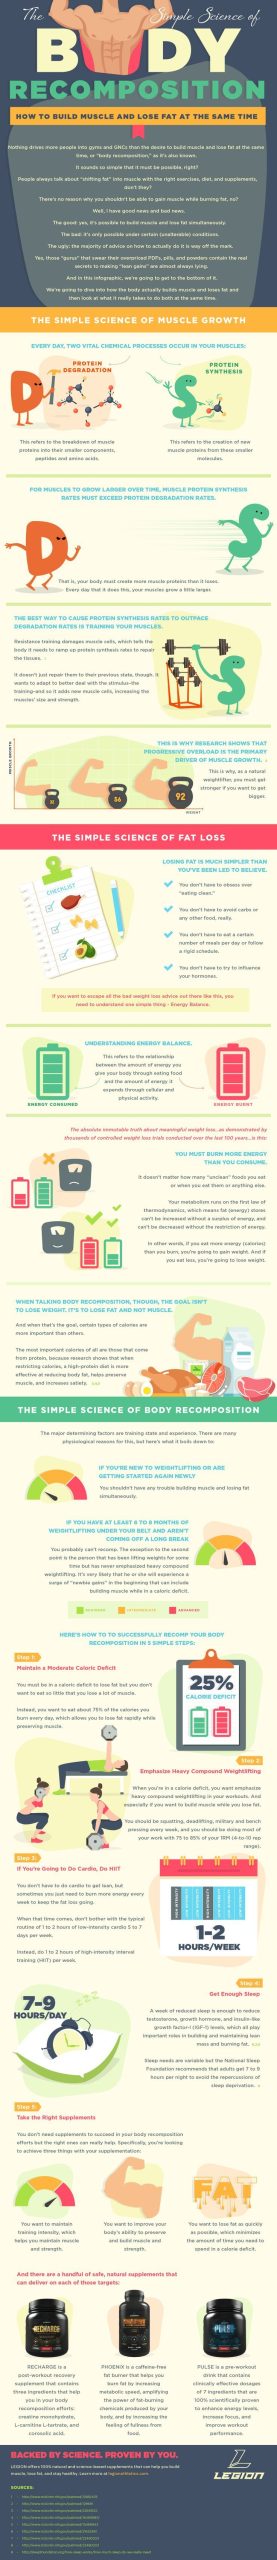 [Infographic] The Secret to Body Recomposition: Lose Fat & Gain Muscle - Legion Athletics